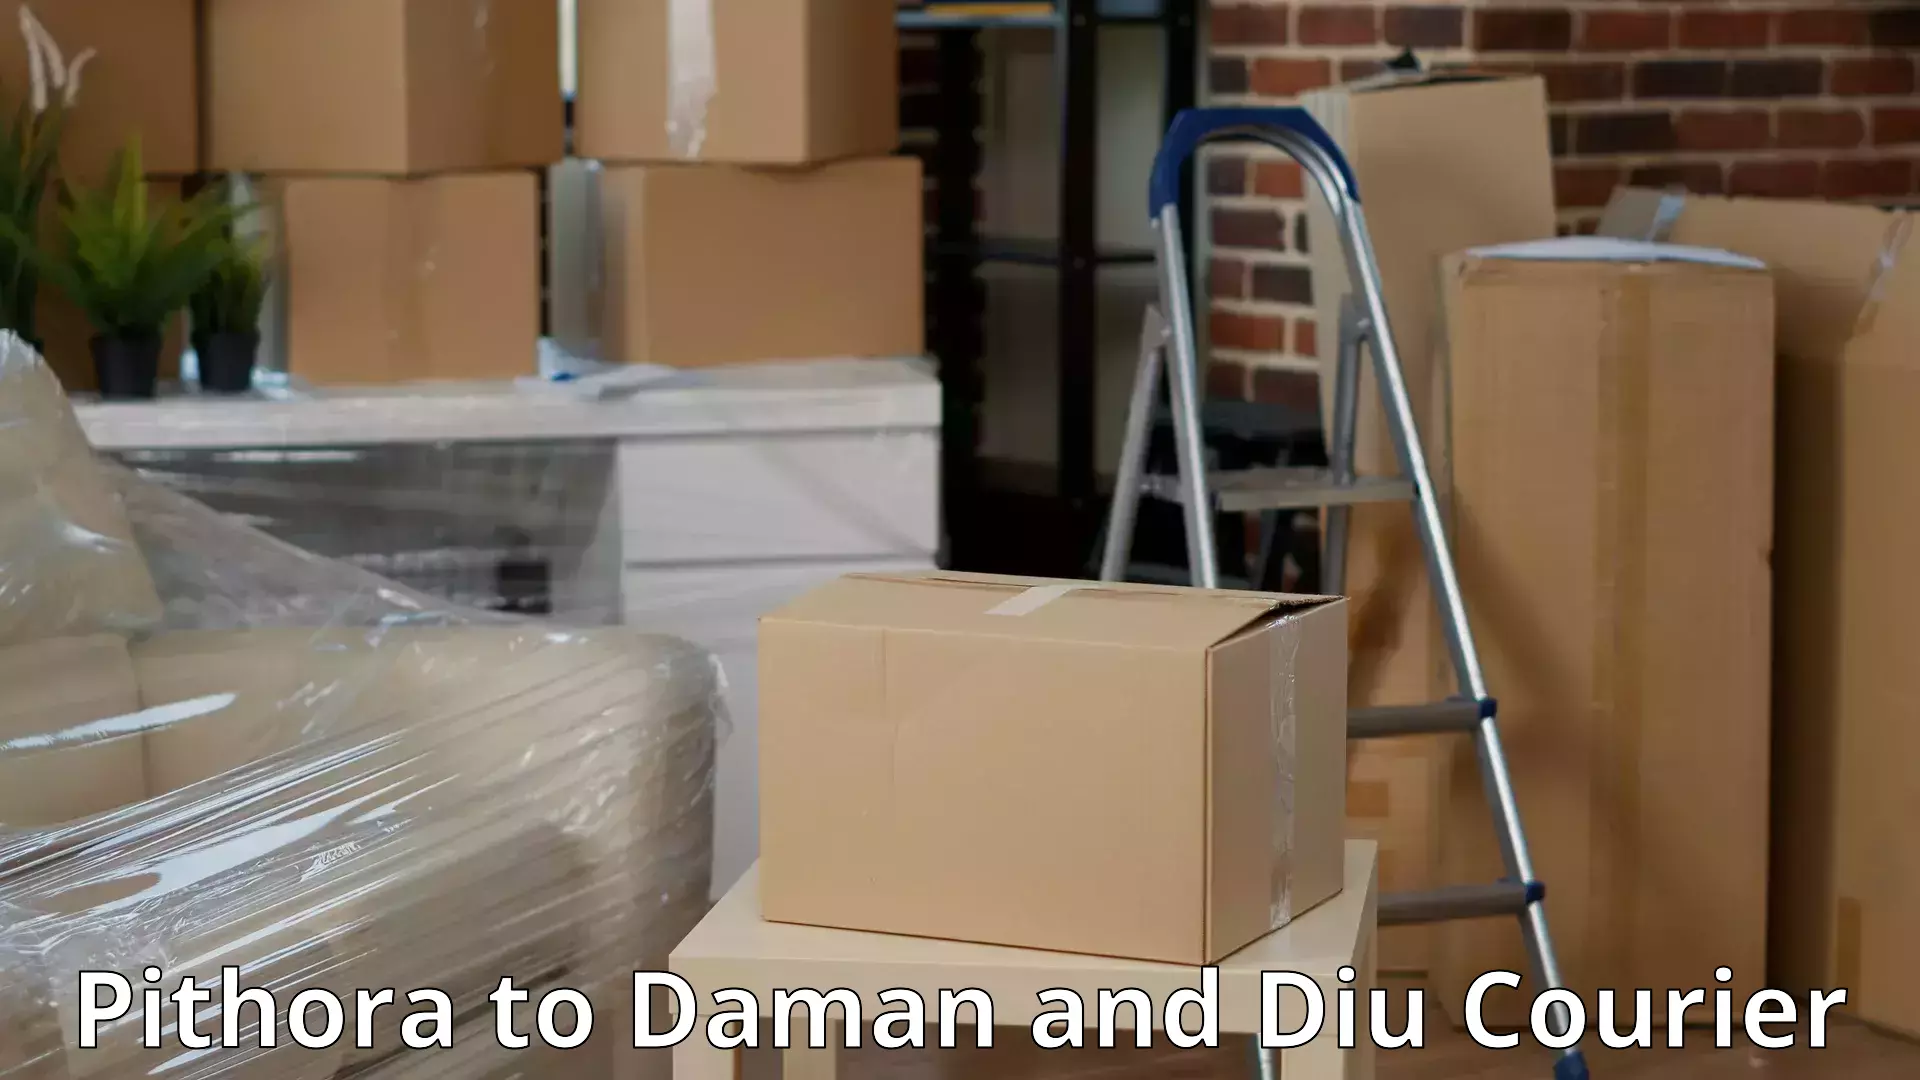 Packing and moving services Pithora to Daman and Diu